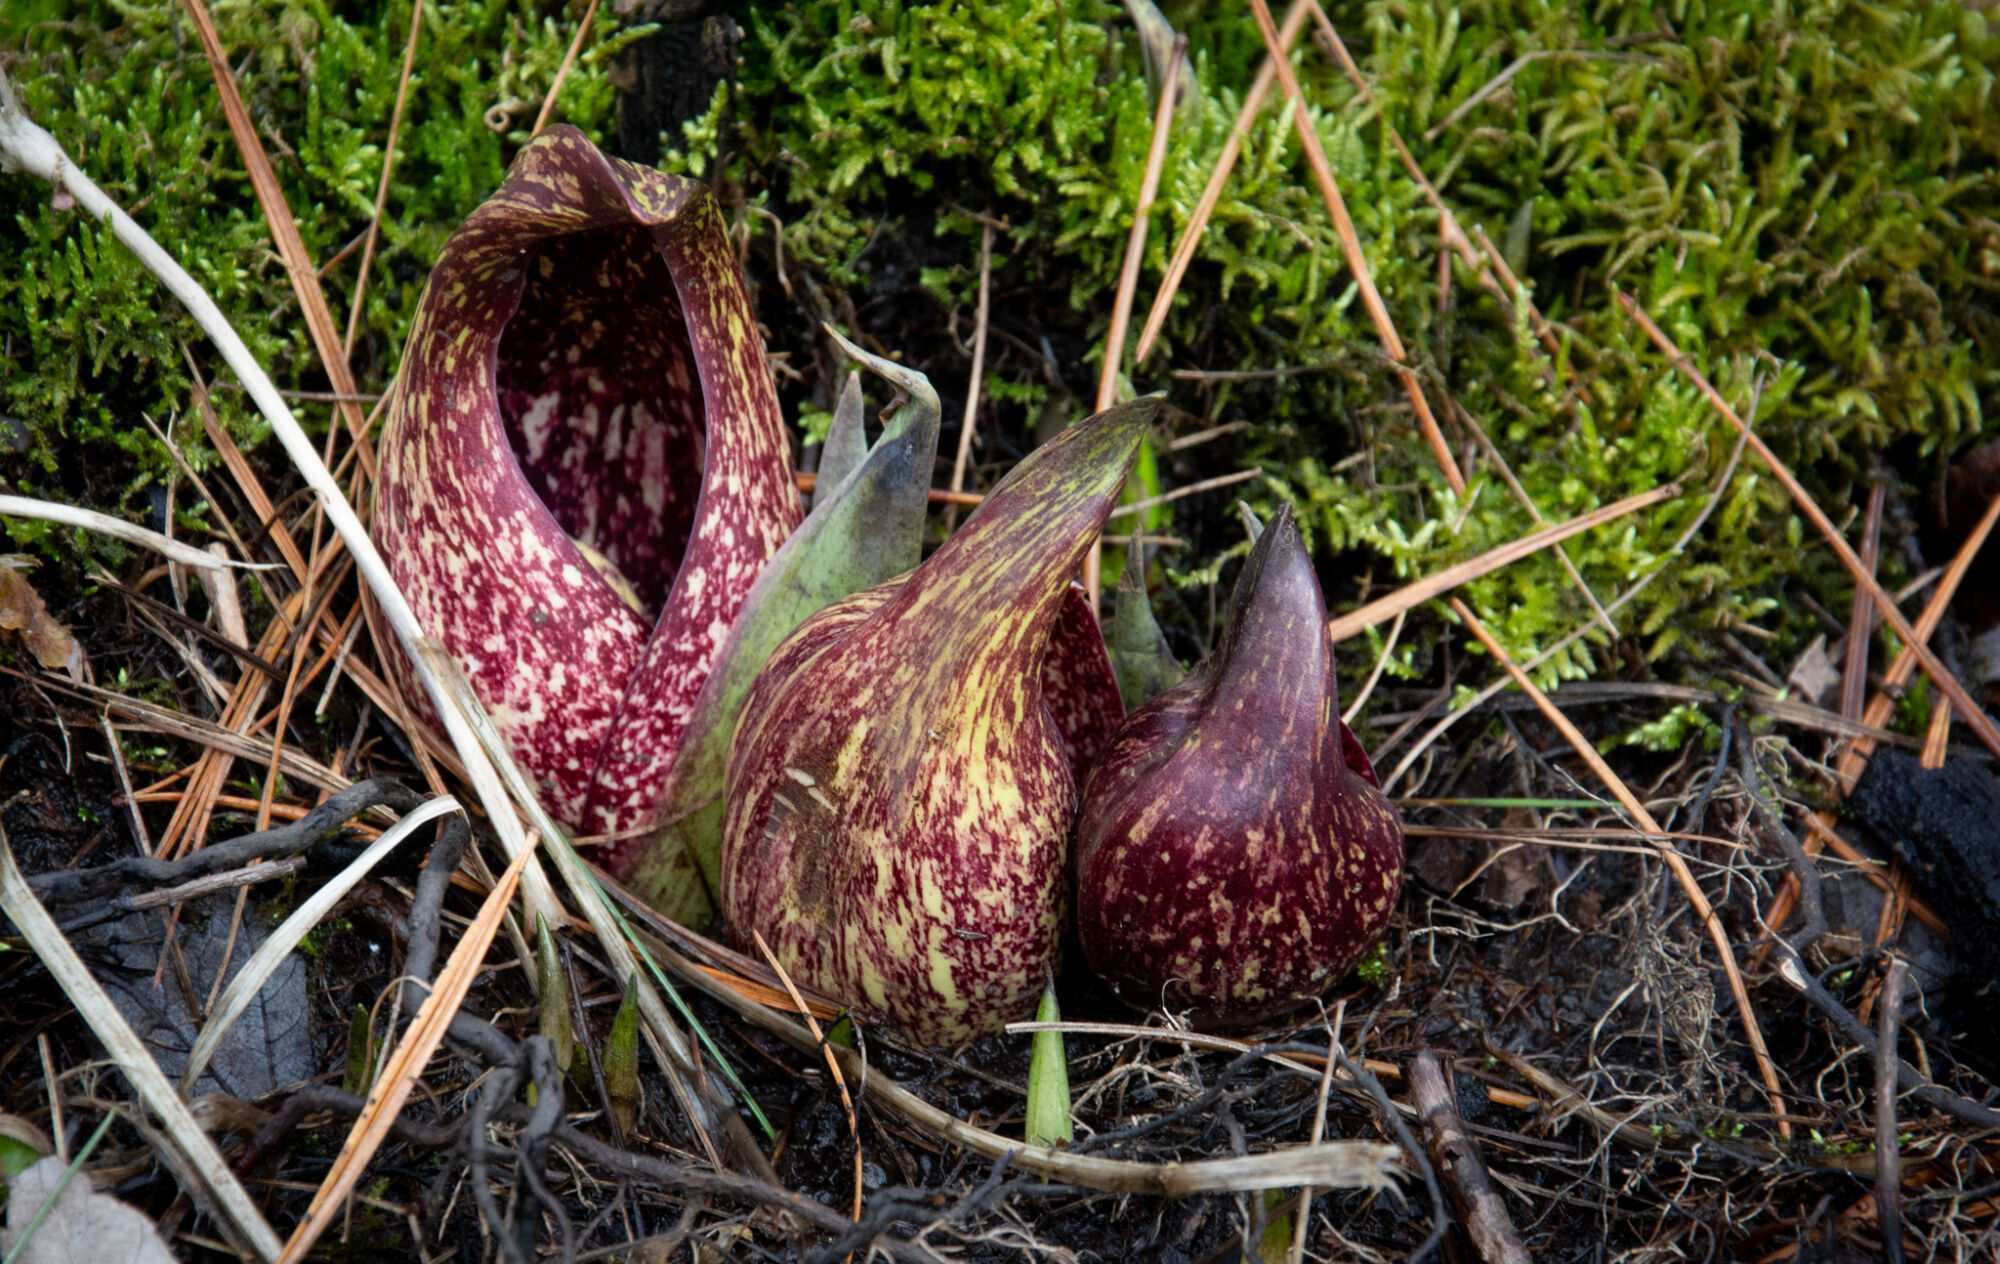 Skunk cabbage flowers emerge from the soil.